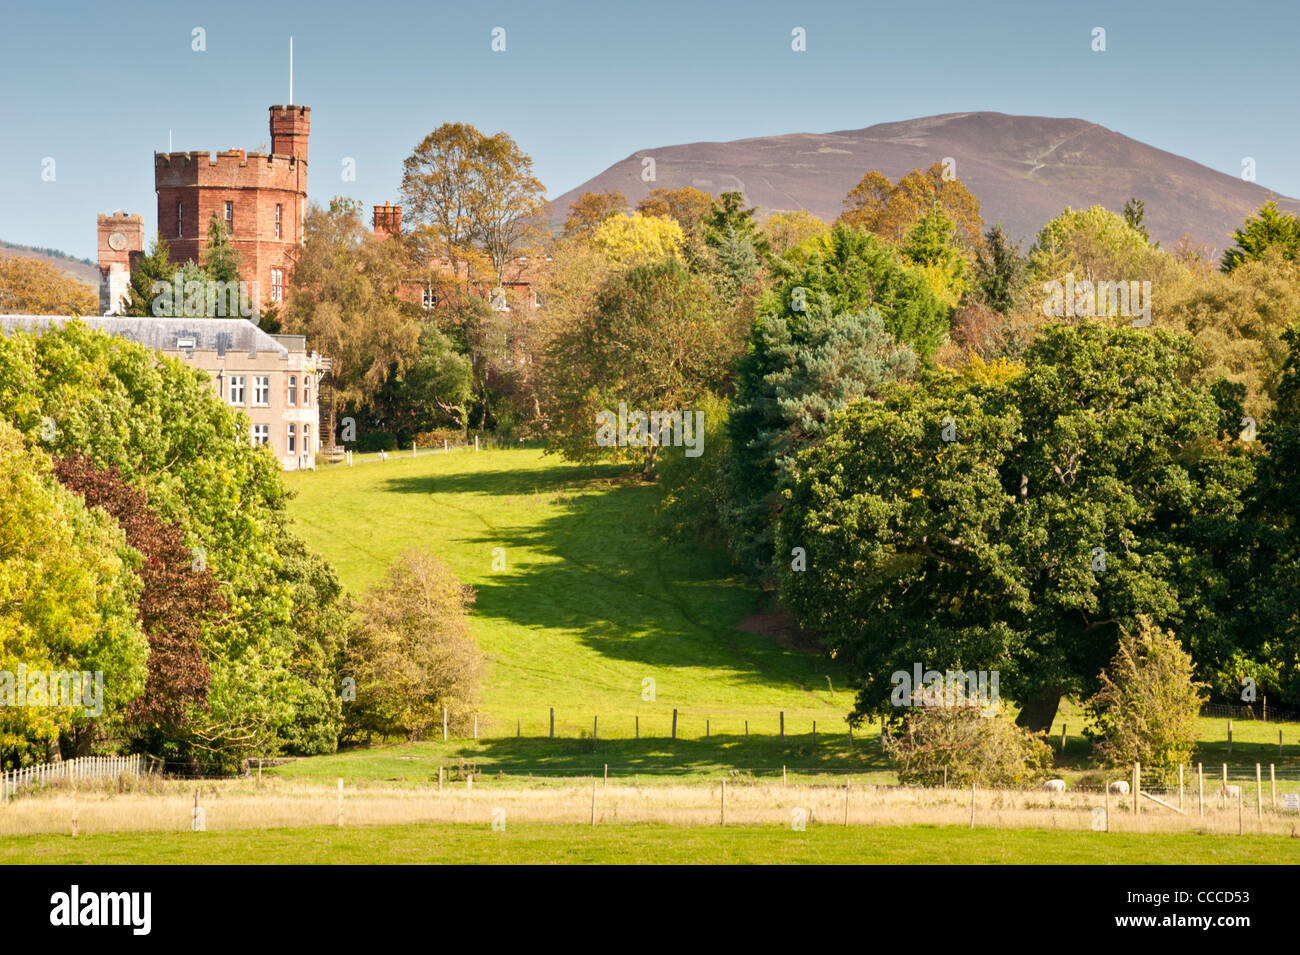 Ruthin Castle, Ruthin, Vale of Clwyd, Denbighshire, North Wales, UK Stock Photo